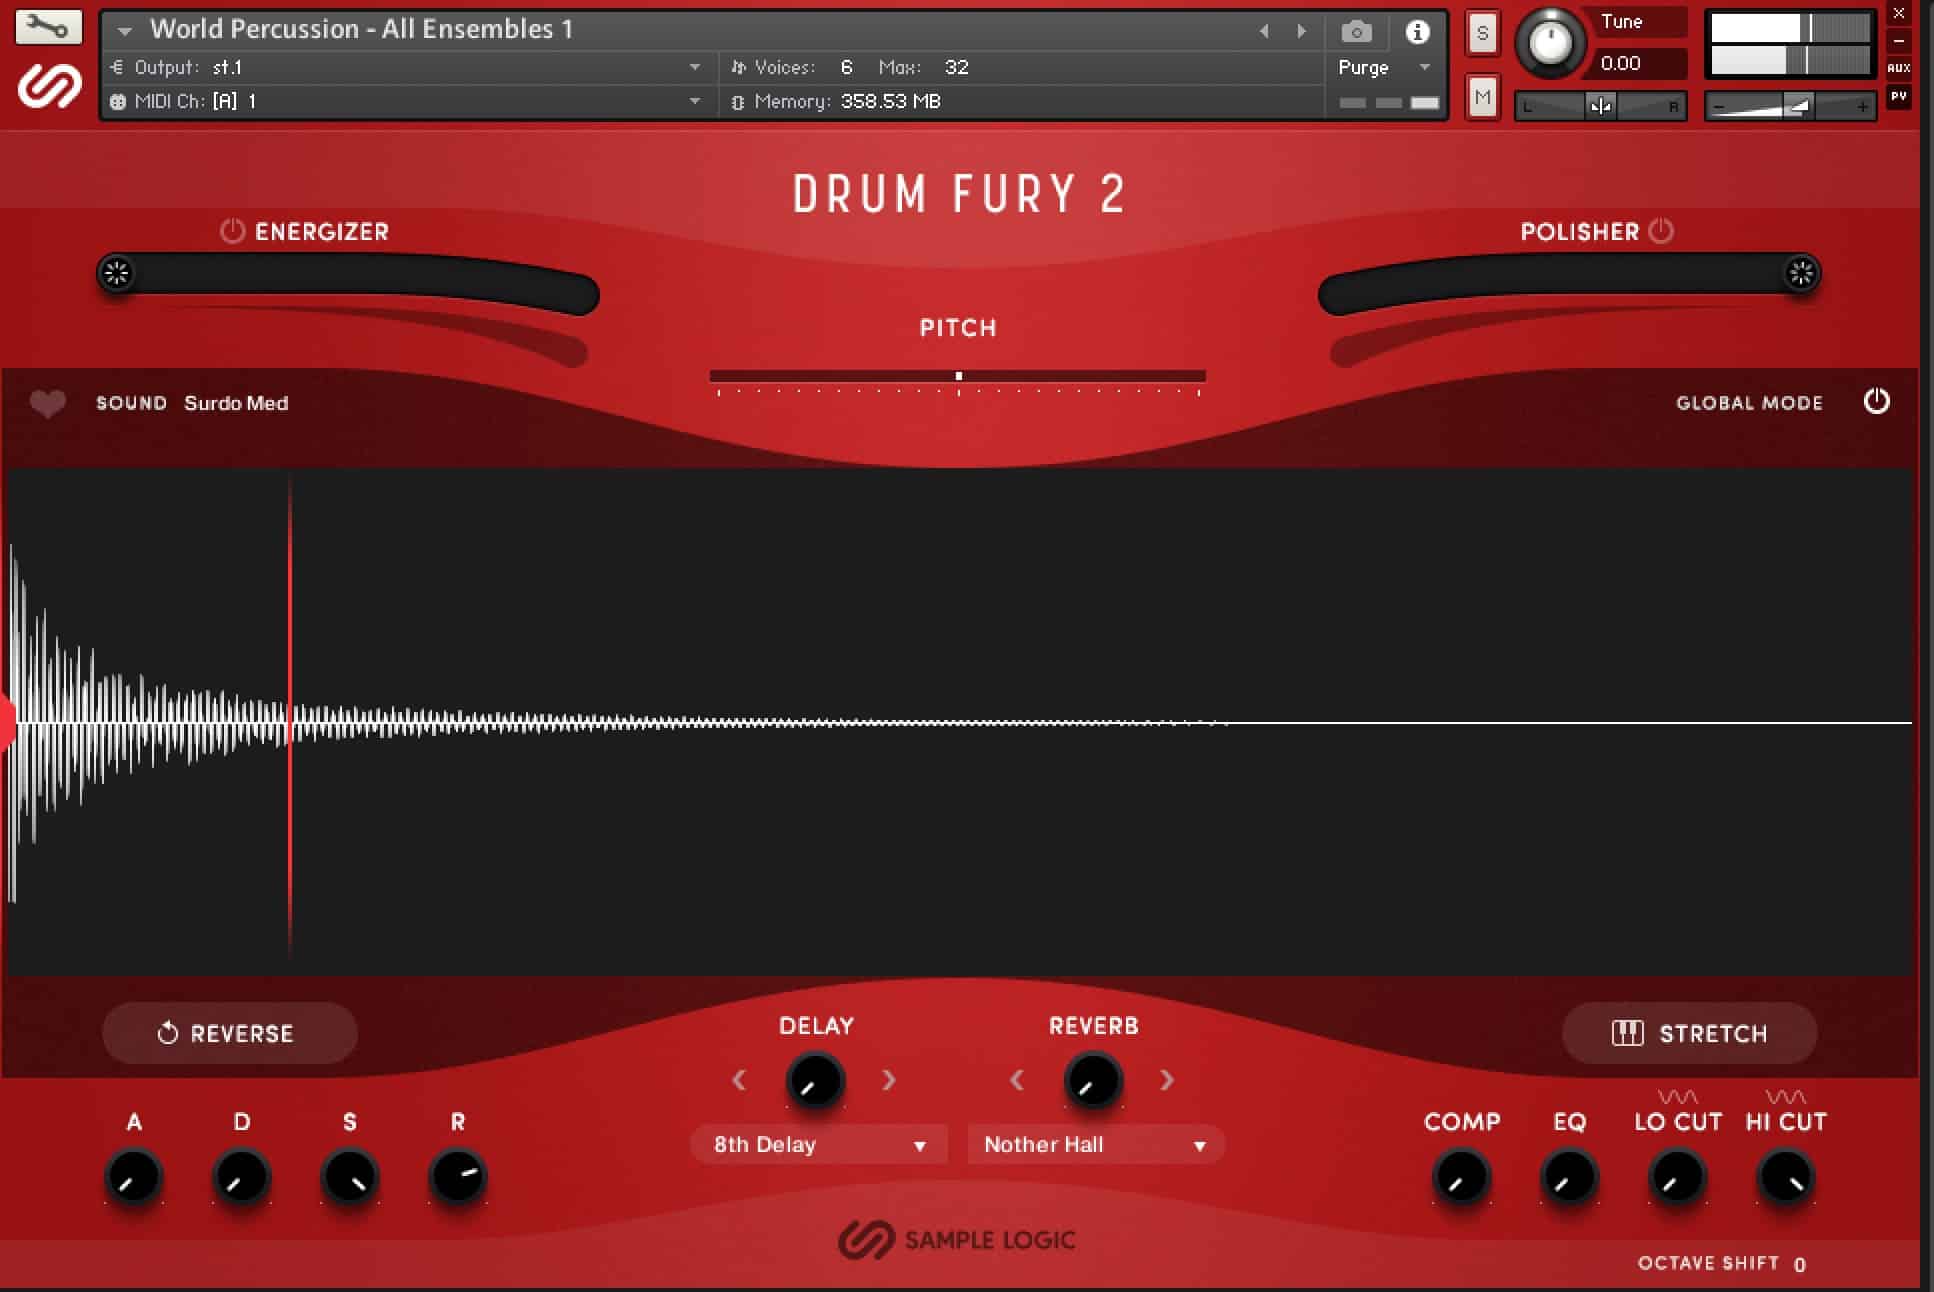 Sample Logic Launches DRUM FURY 2 – Mold & Sculpt Percussion Like Never Before